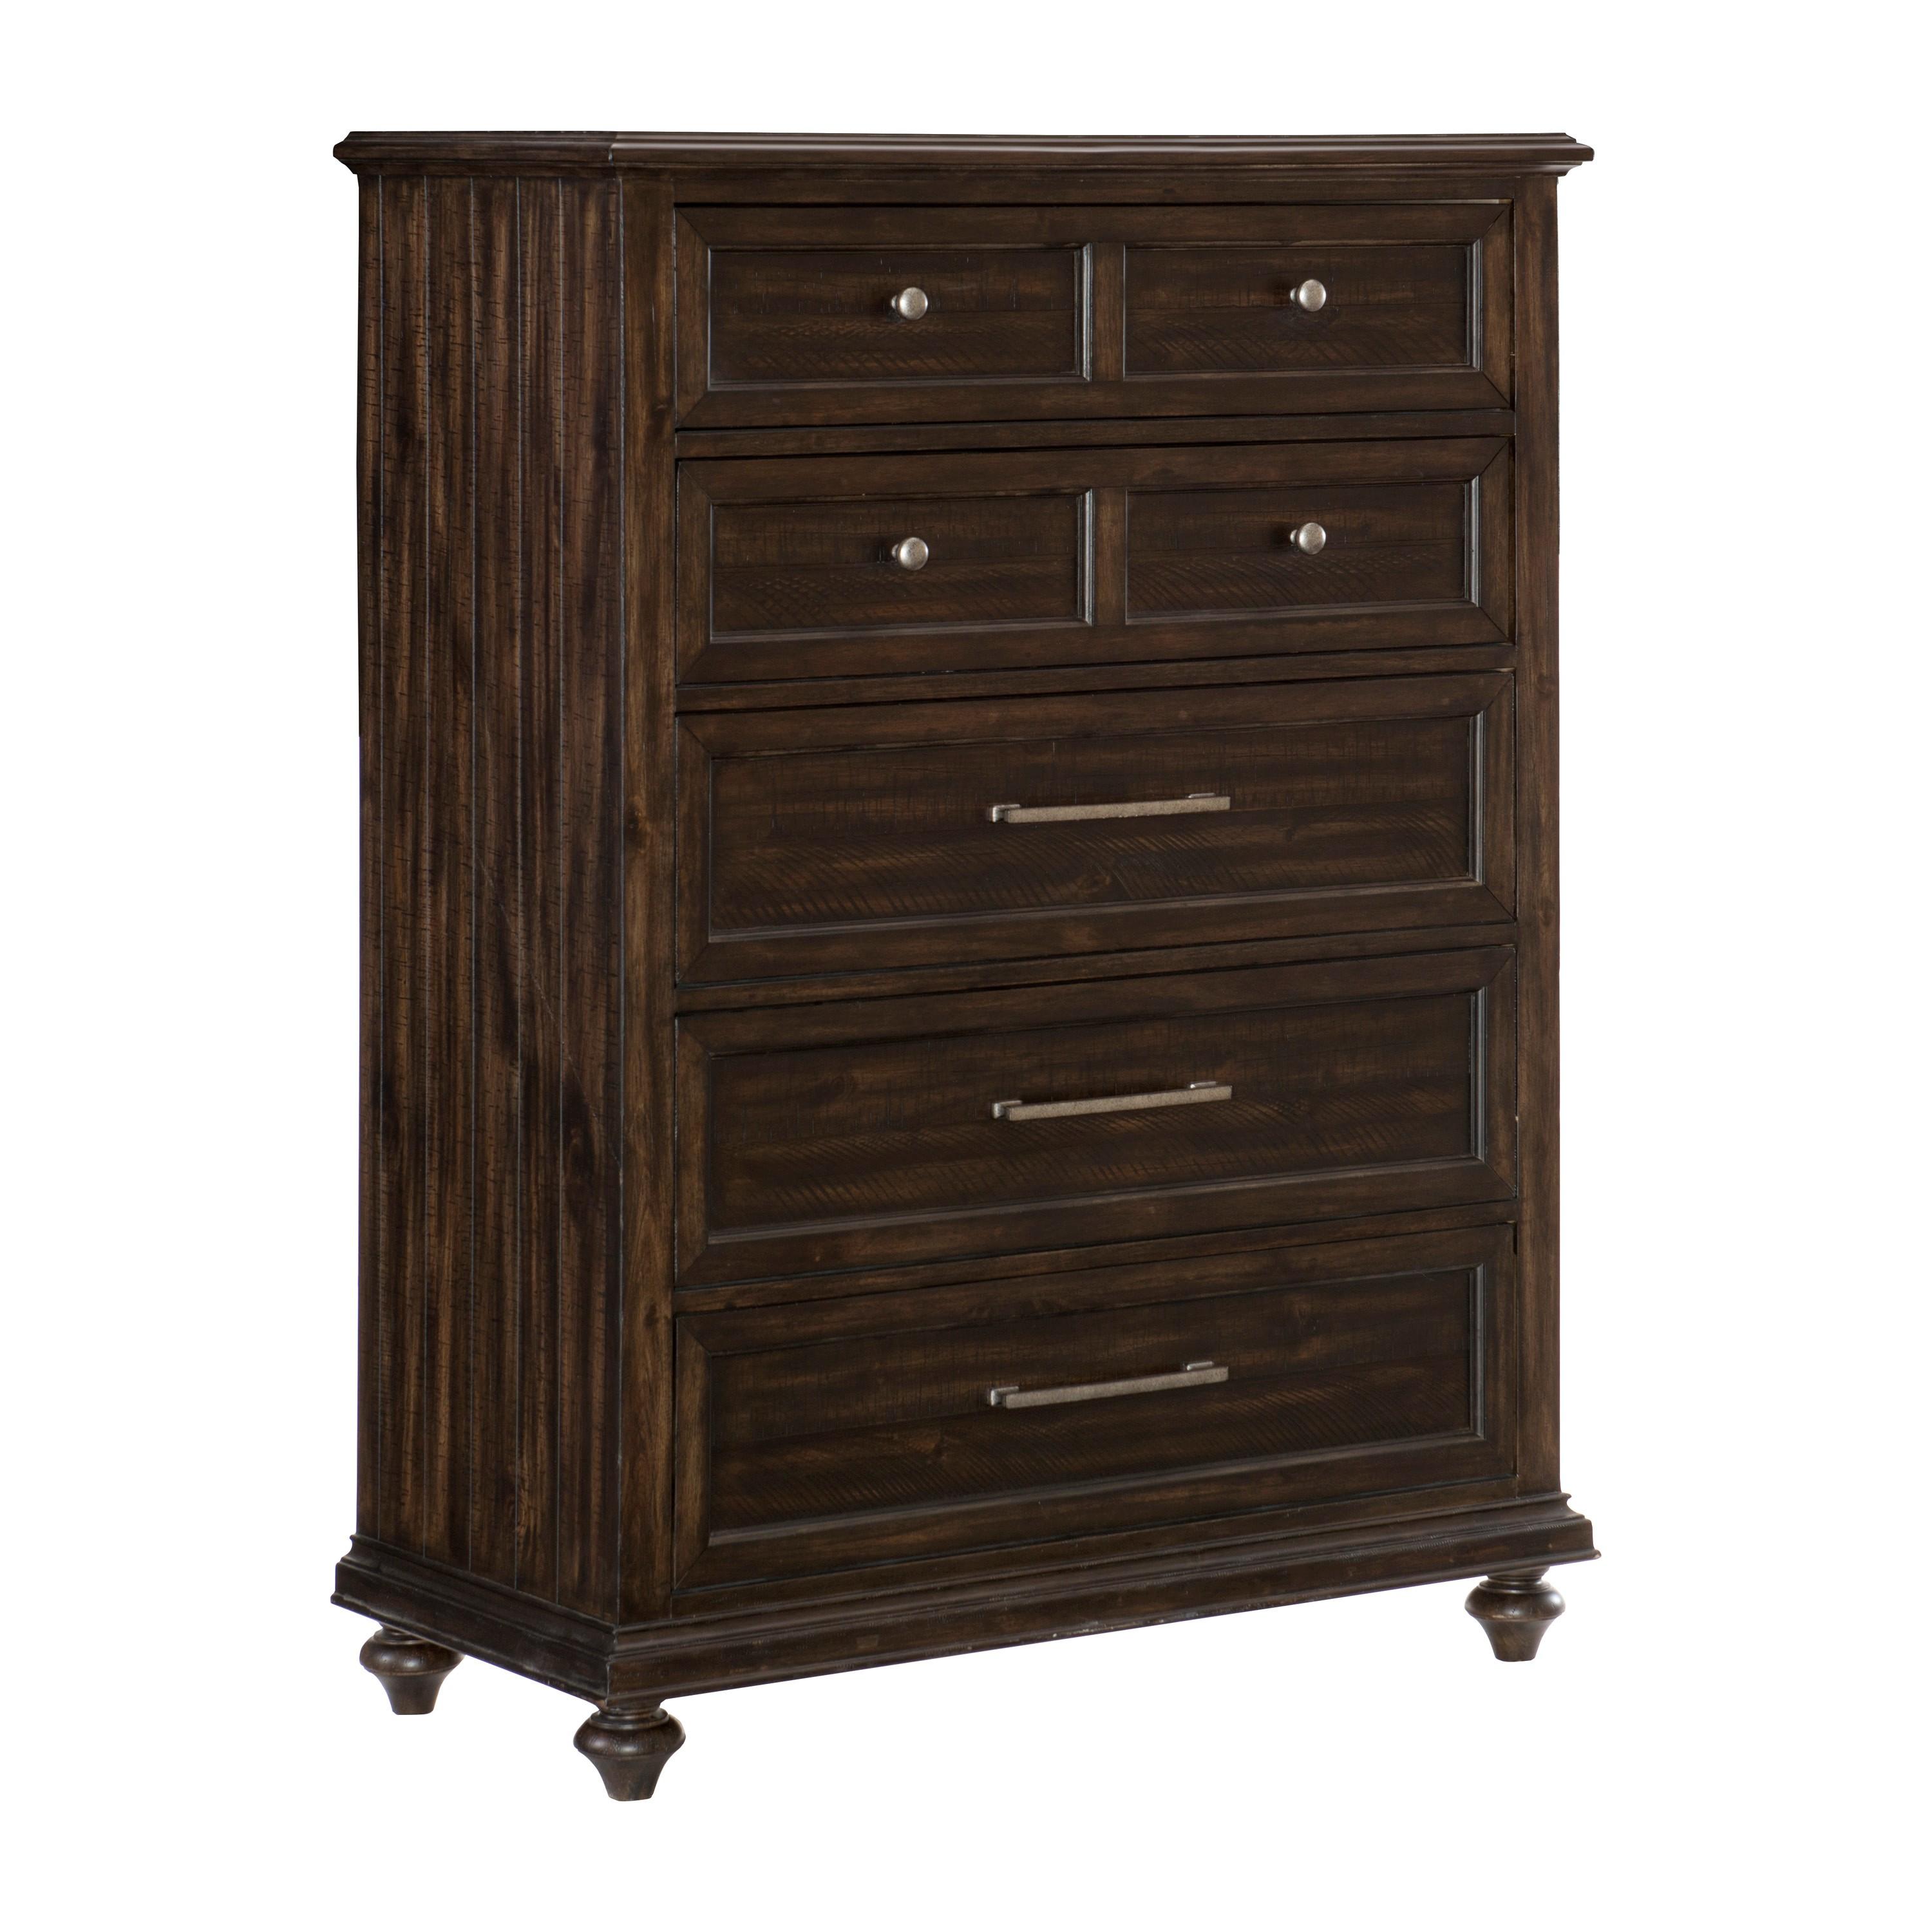 Transitional Chest 1689-9 Cardano 1689-9 in Charcoal 